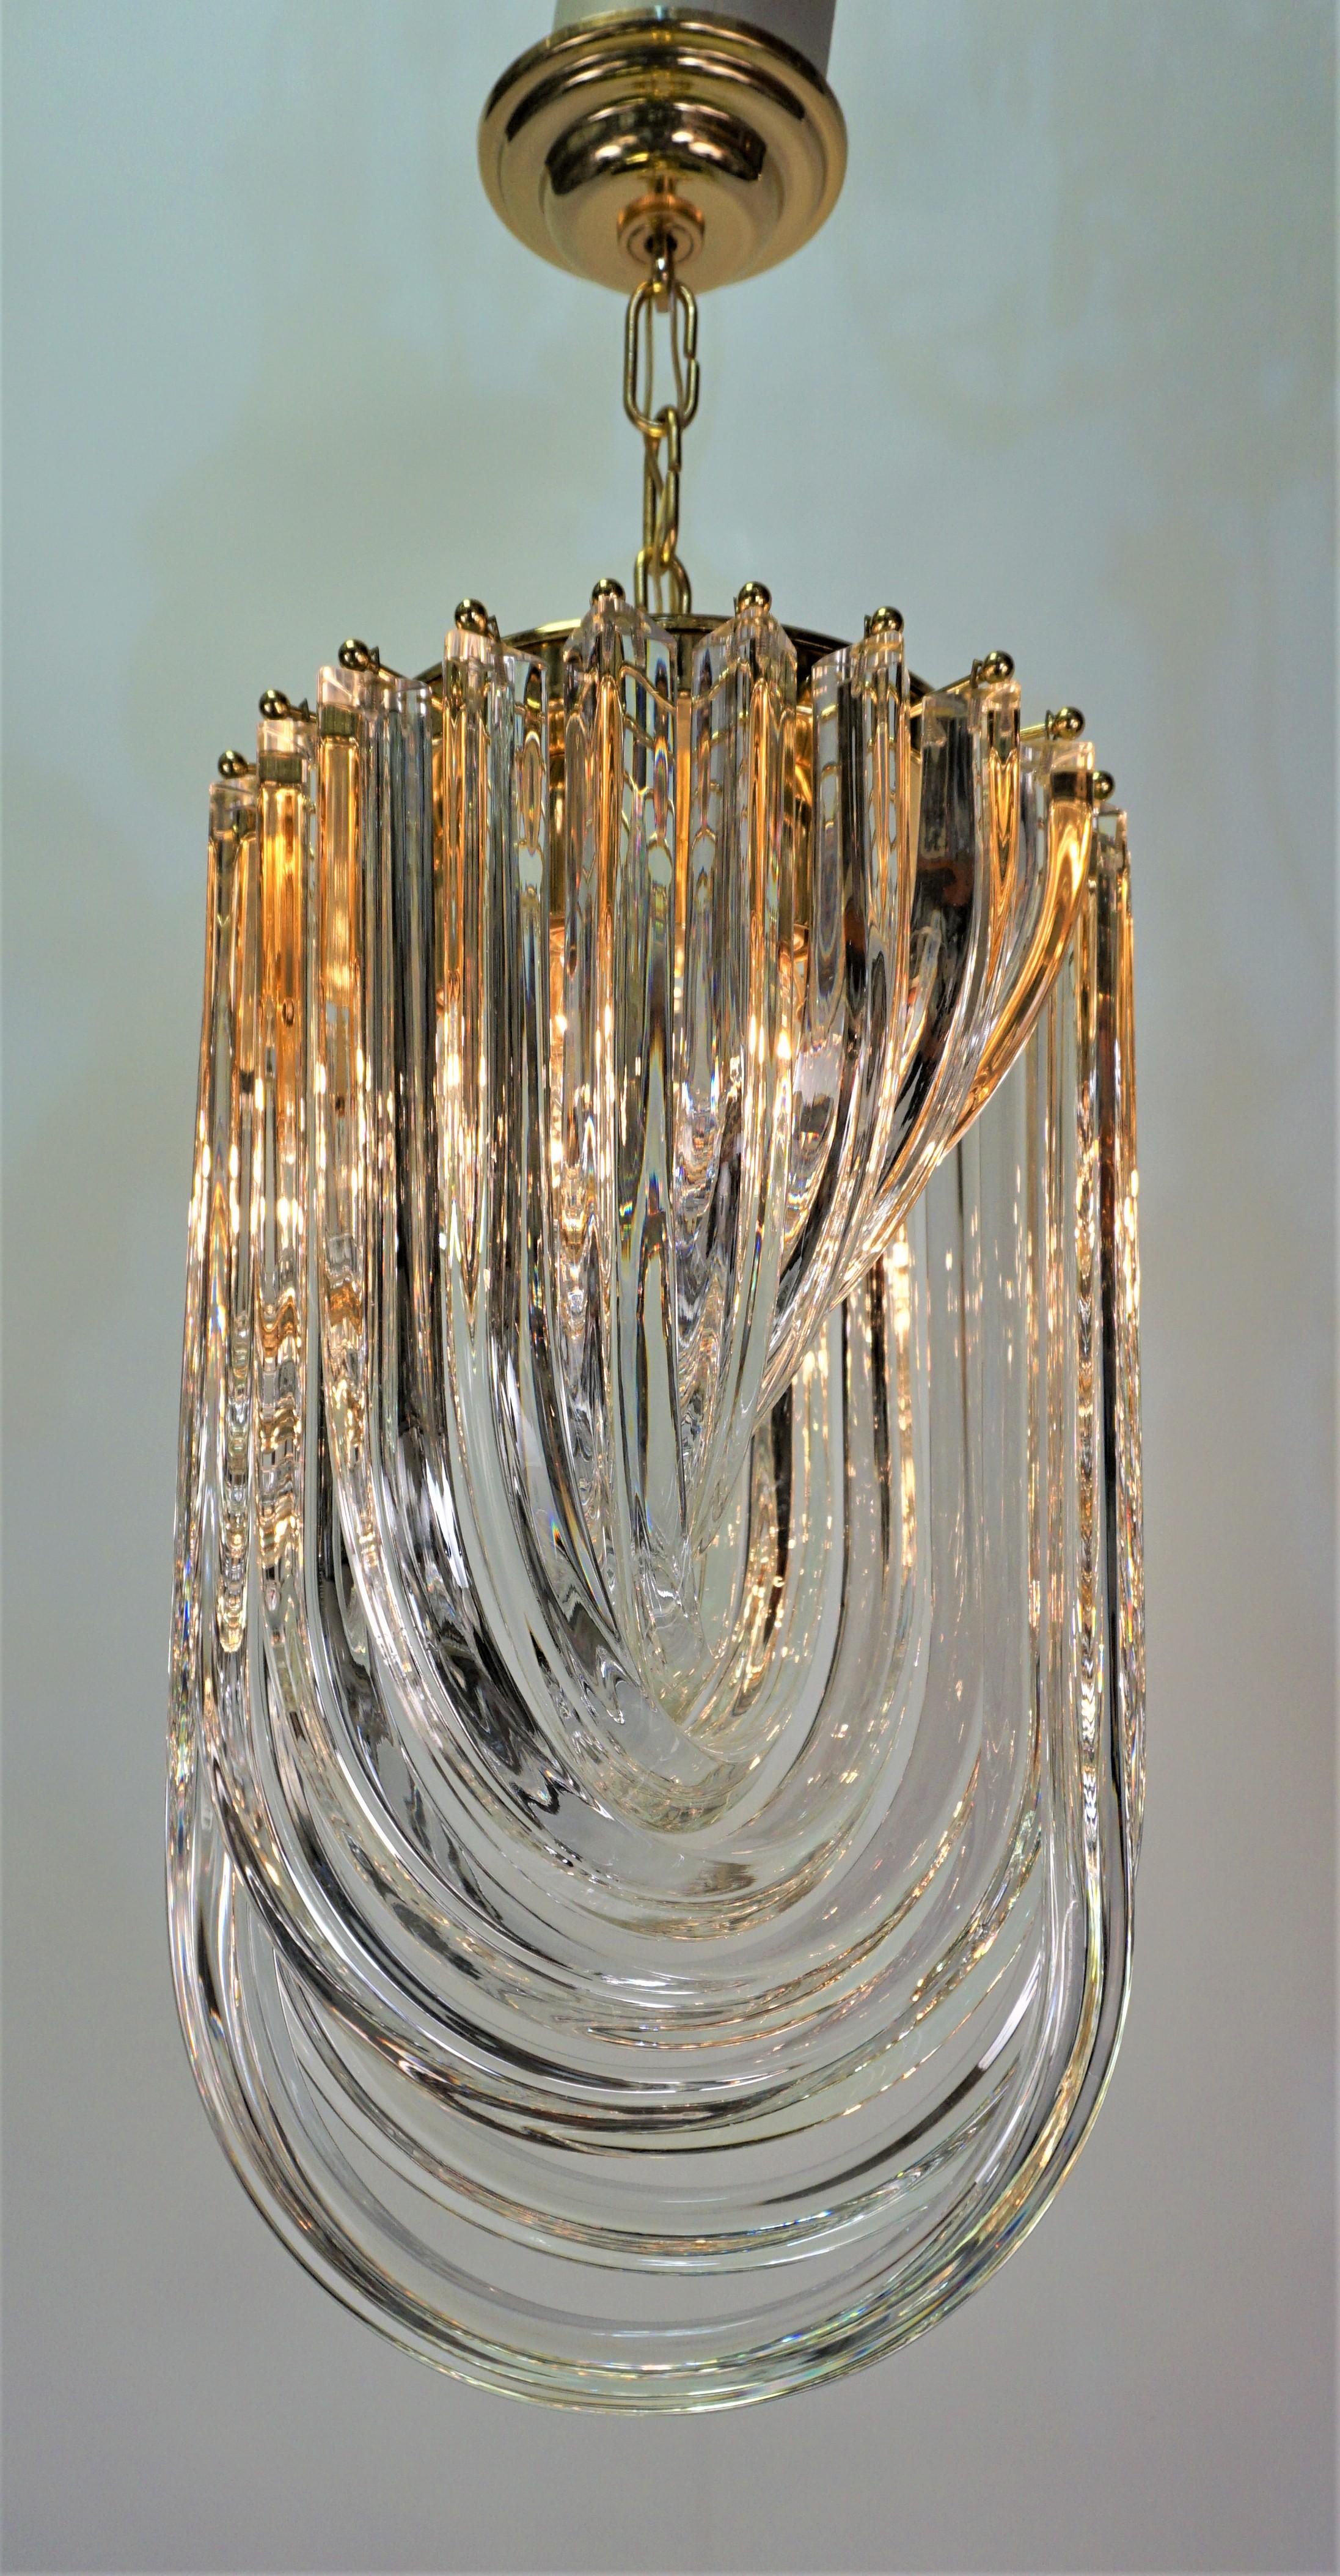 Extra fine quality eleven U shape Murano glass with gold plated hardware chandelier by Carlo Nason.